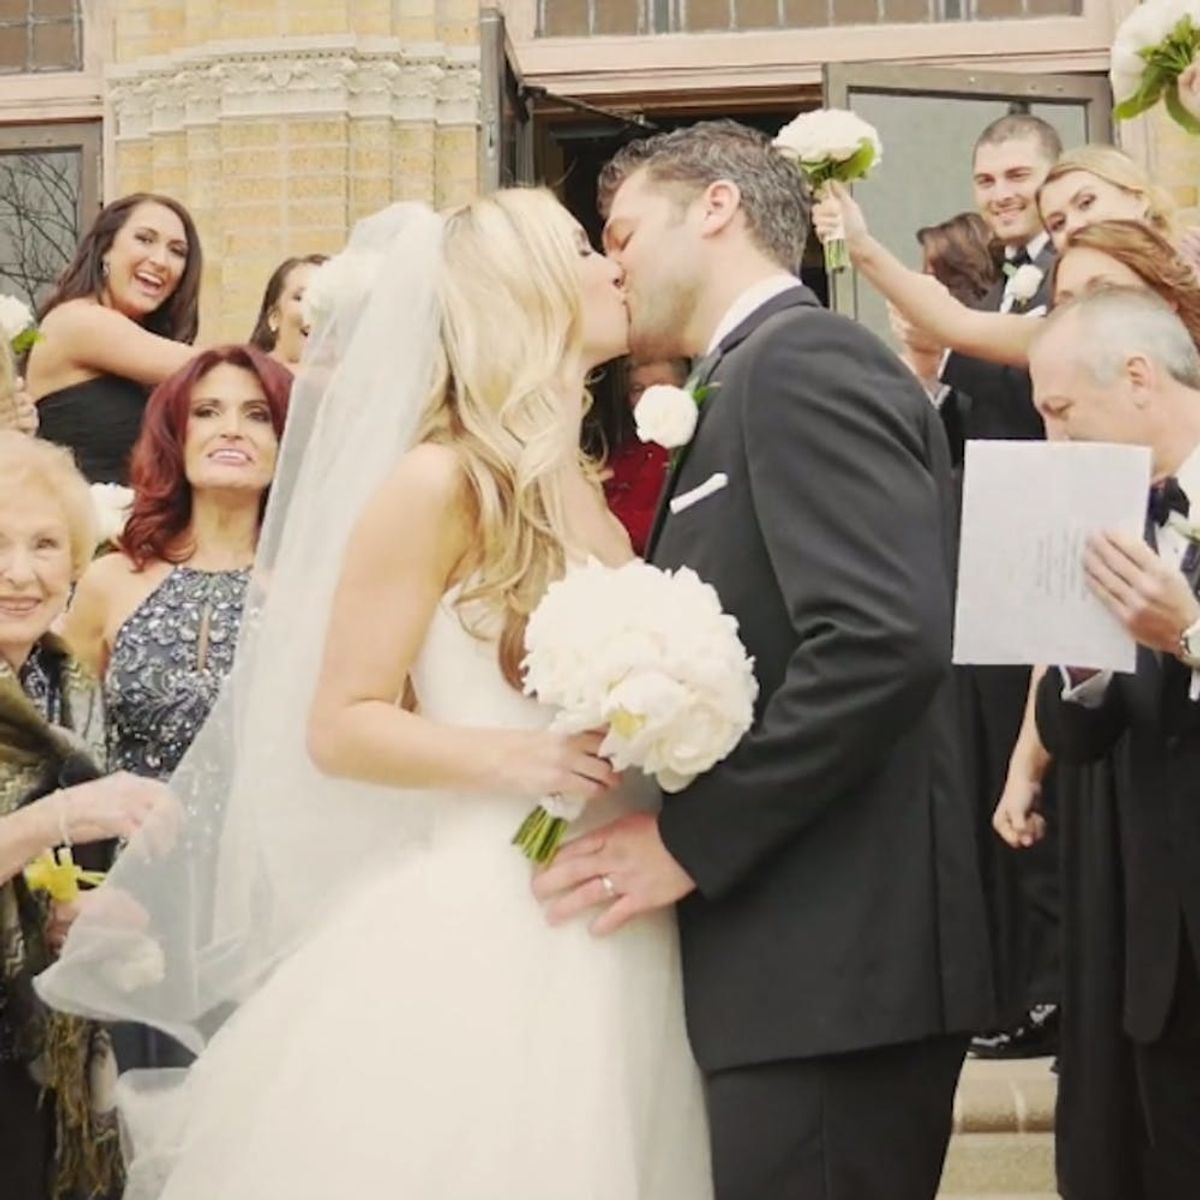 Their Proposal Video Went Viral — But Have You Seen Their Wedding Video?